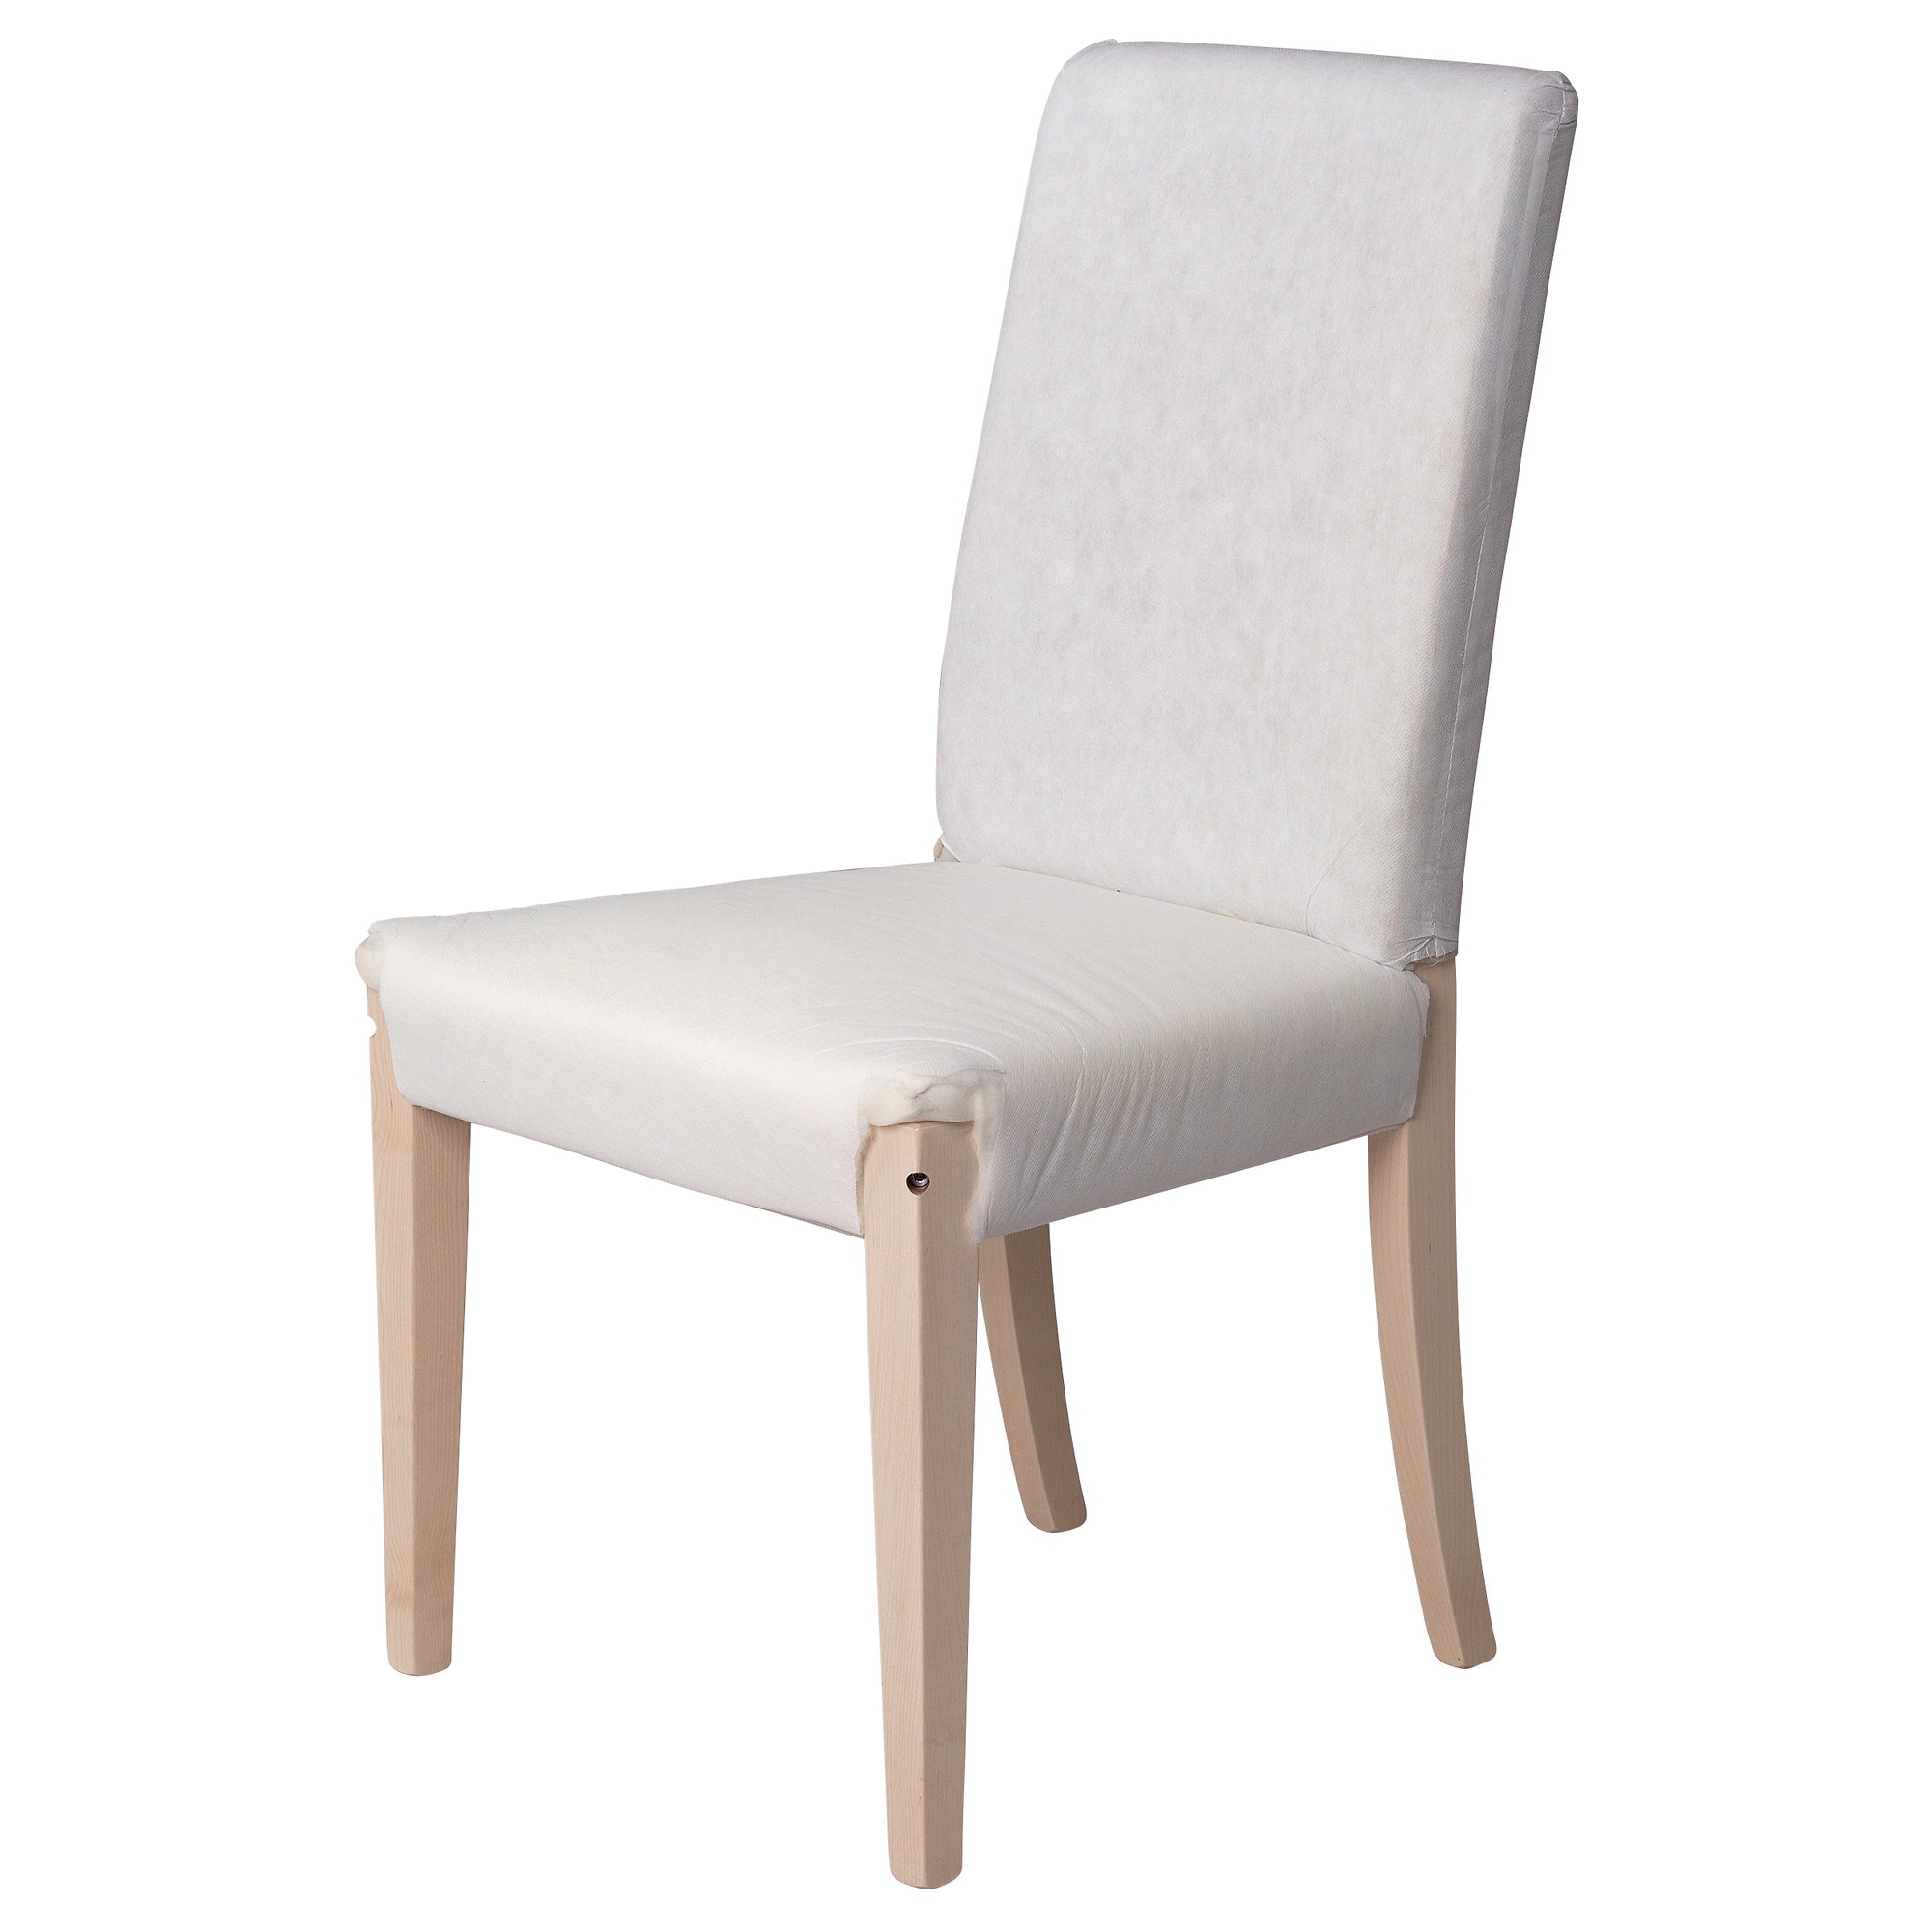 Henriksdal Ikea Dining Chairs Komnit, Cream Leather Dining Chairs Ikea